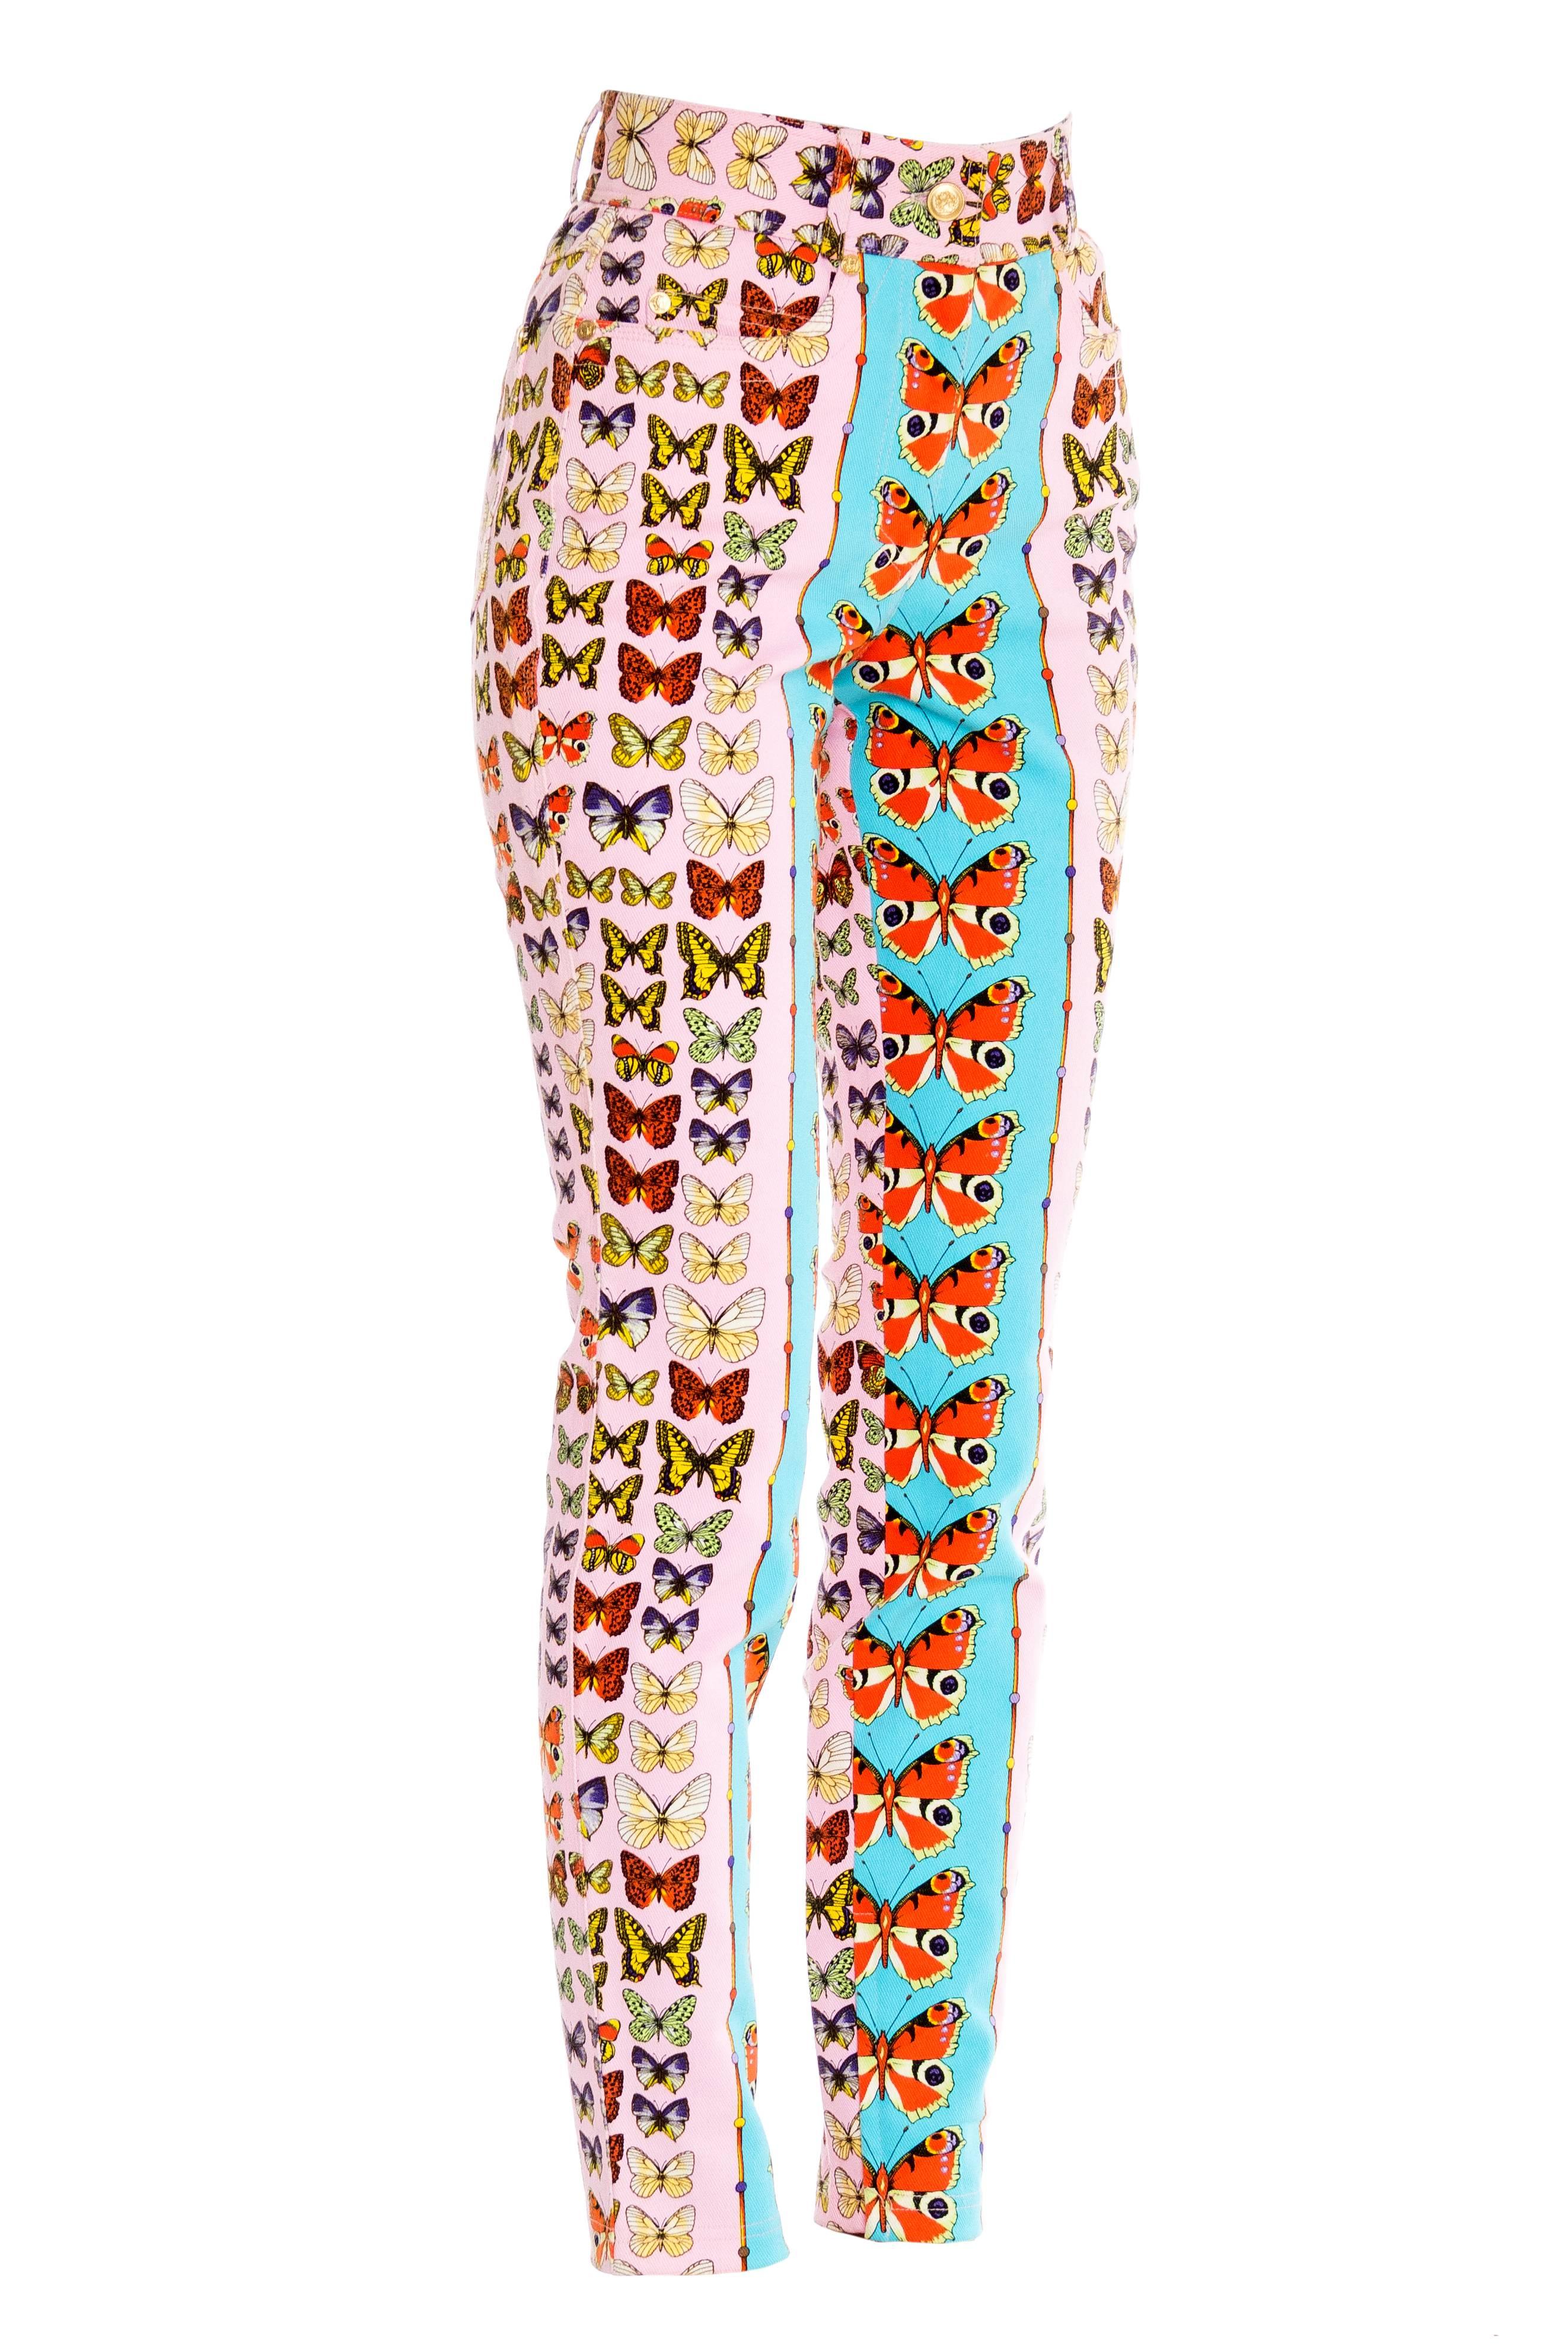 This is the iconic butterfly print as seen on the cover of Vogue in the early 1990s. 